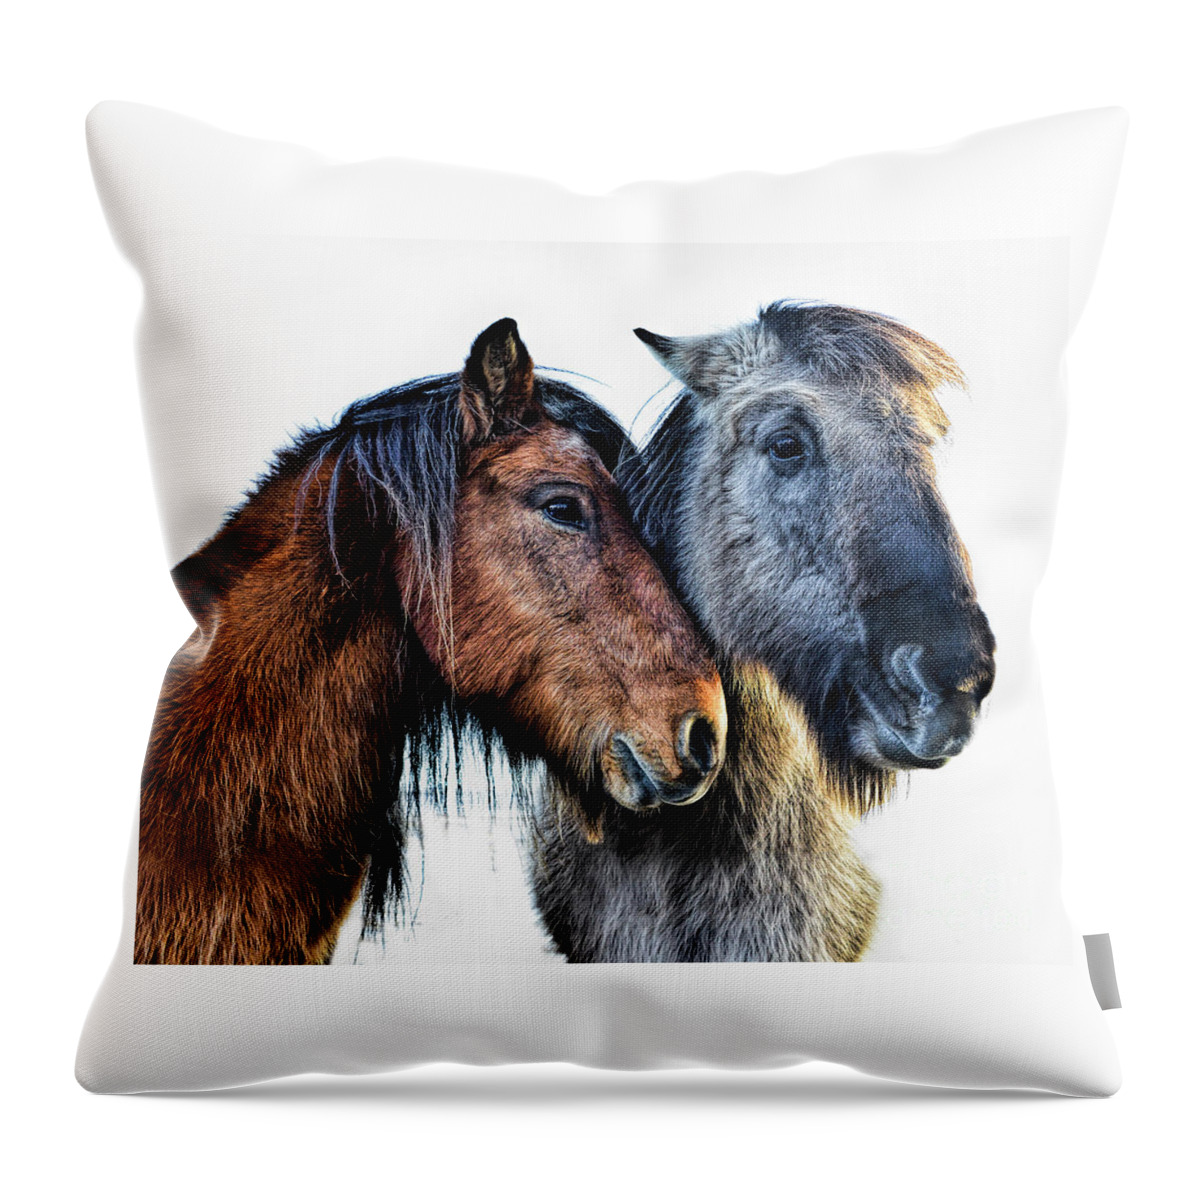 Affection Throw Pillow featuring the photograph Affection by Diane LaPreta